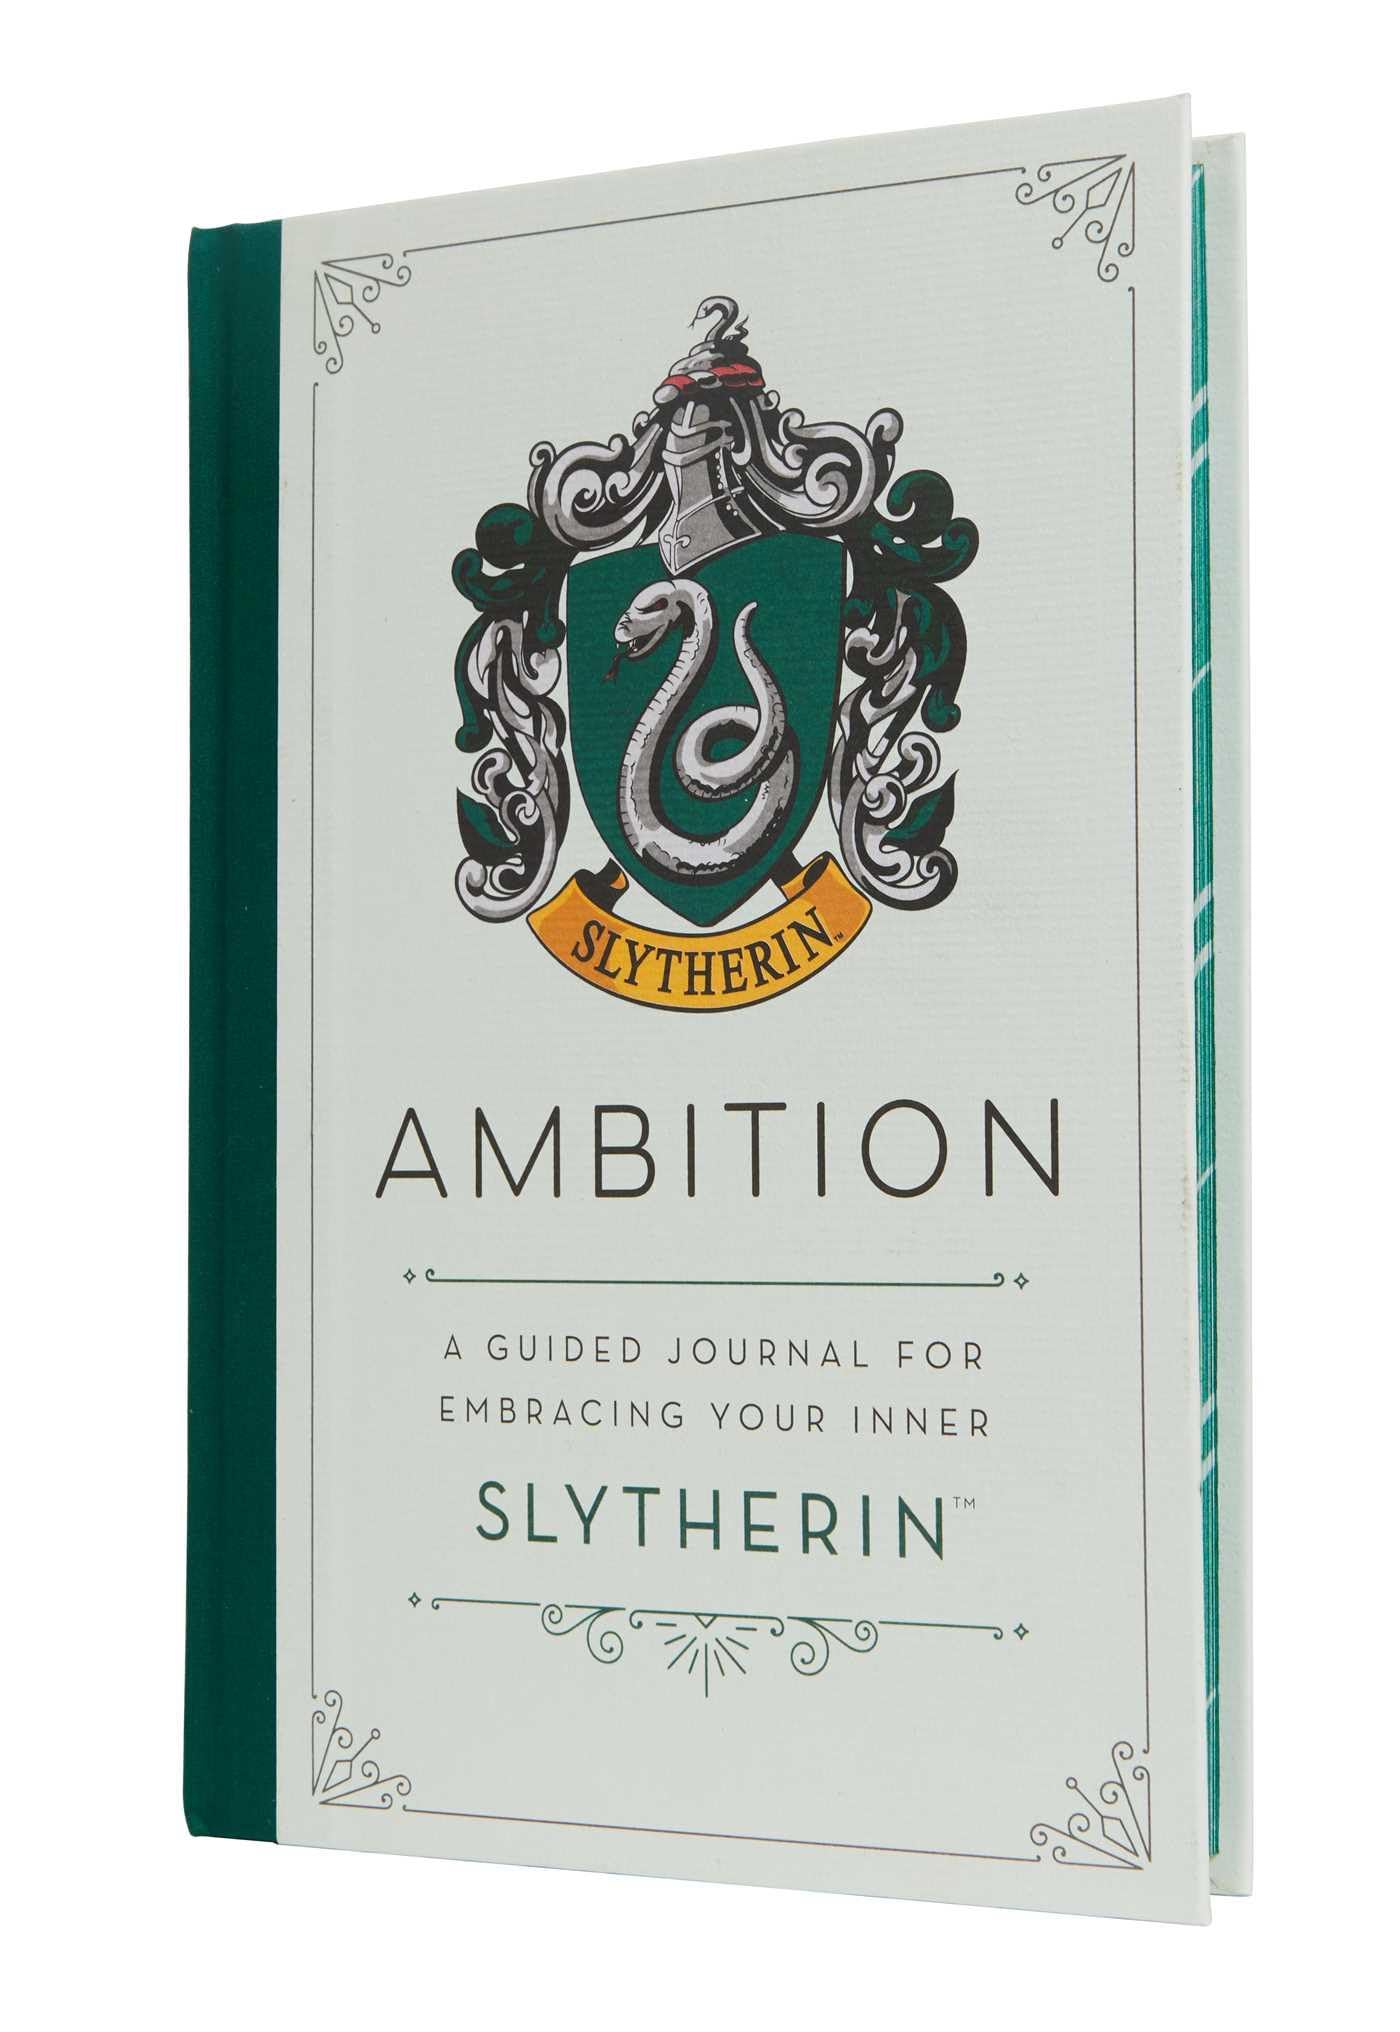 Harry Potter: A Guided Journal for Embracing Your Inner Slytherin